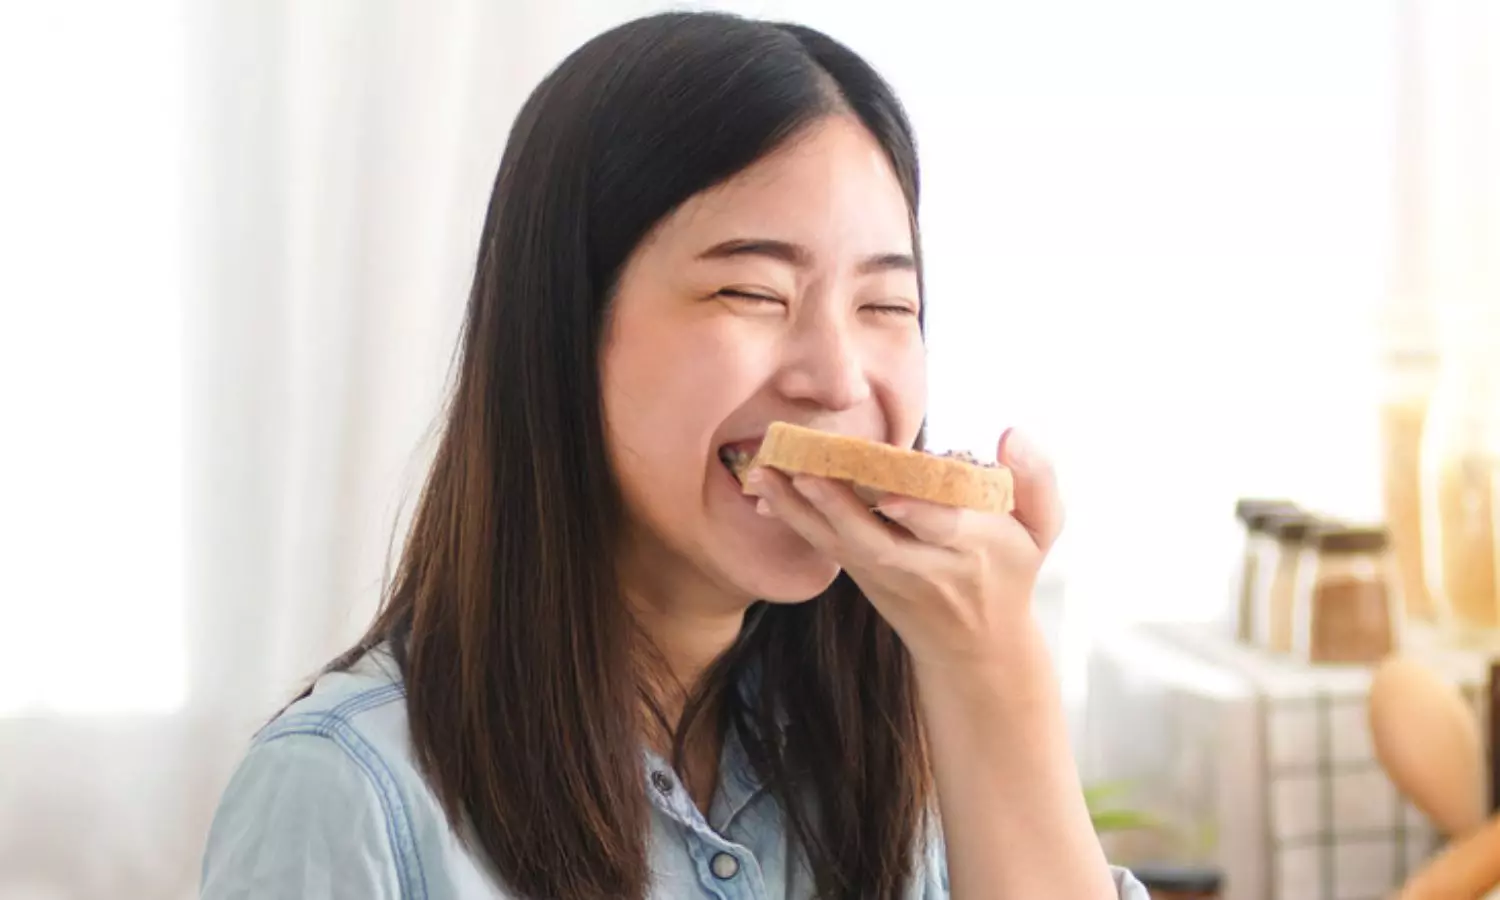 Does eating bread really help you lose weight find out what the experts say